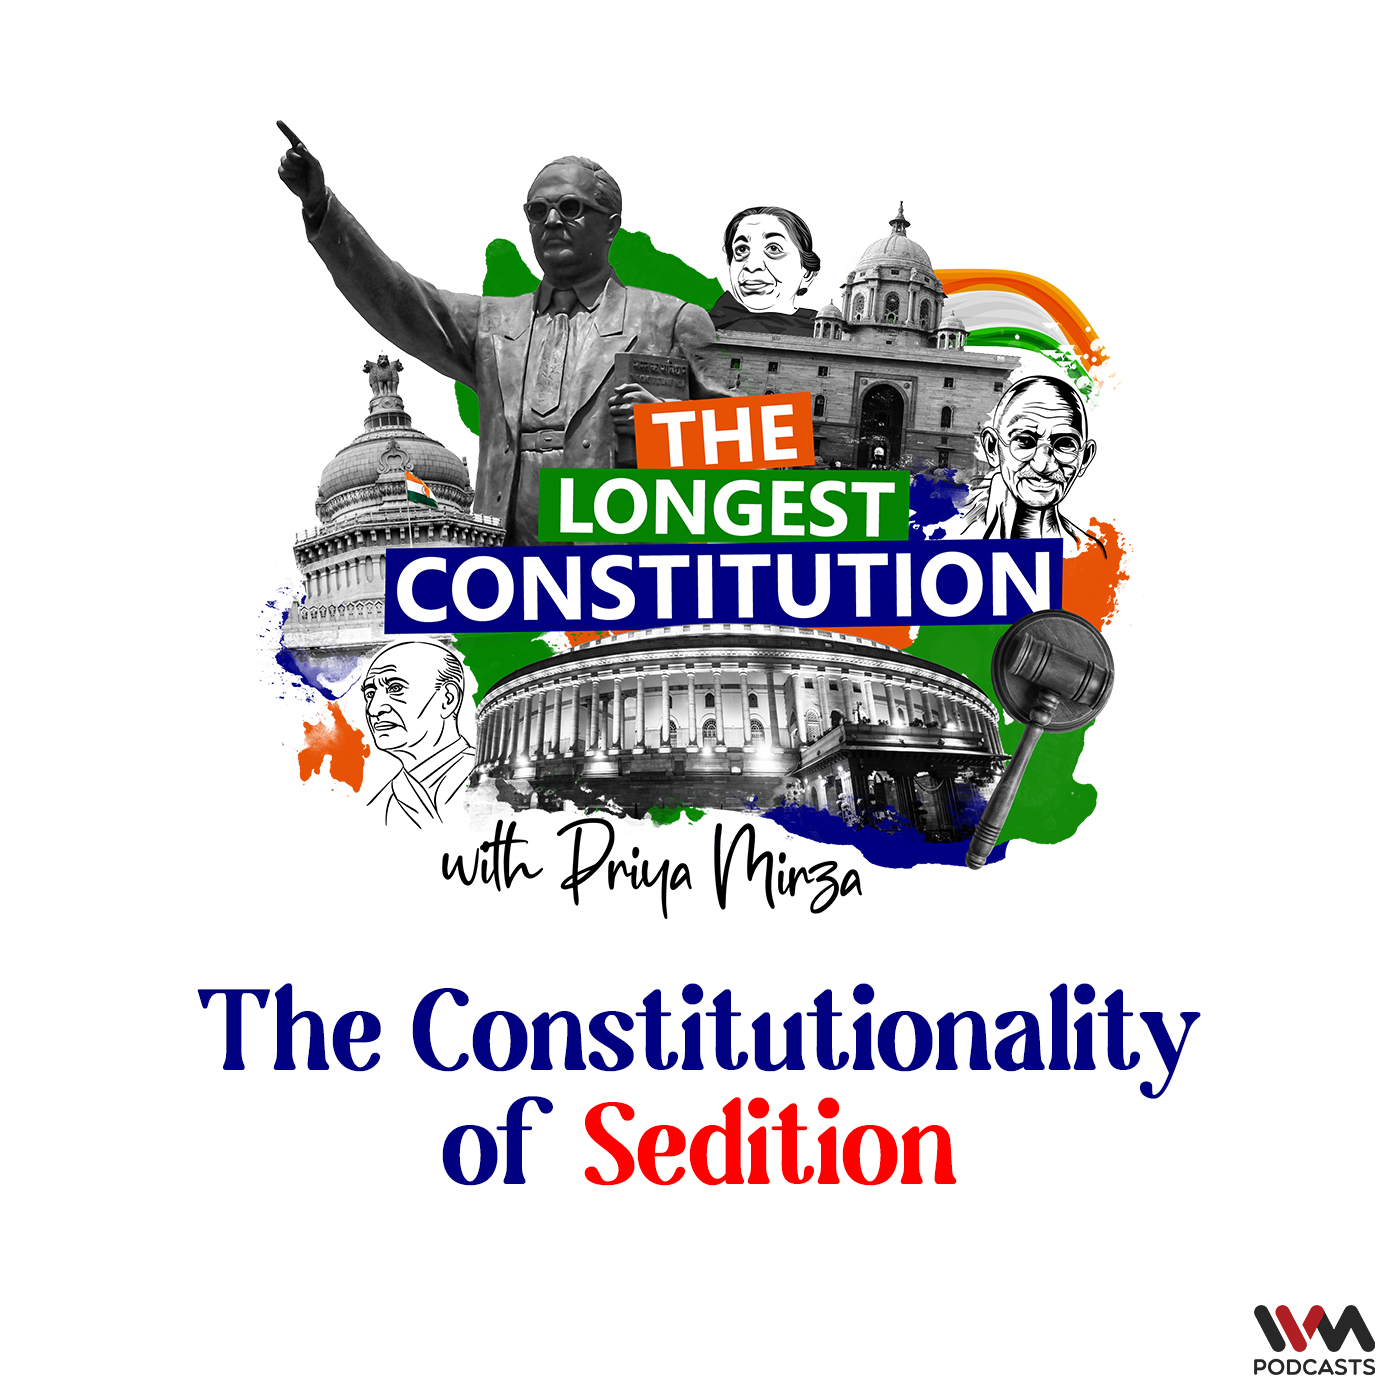 The Constitutionality of Sedition